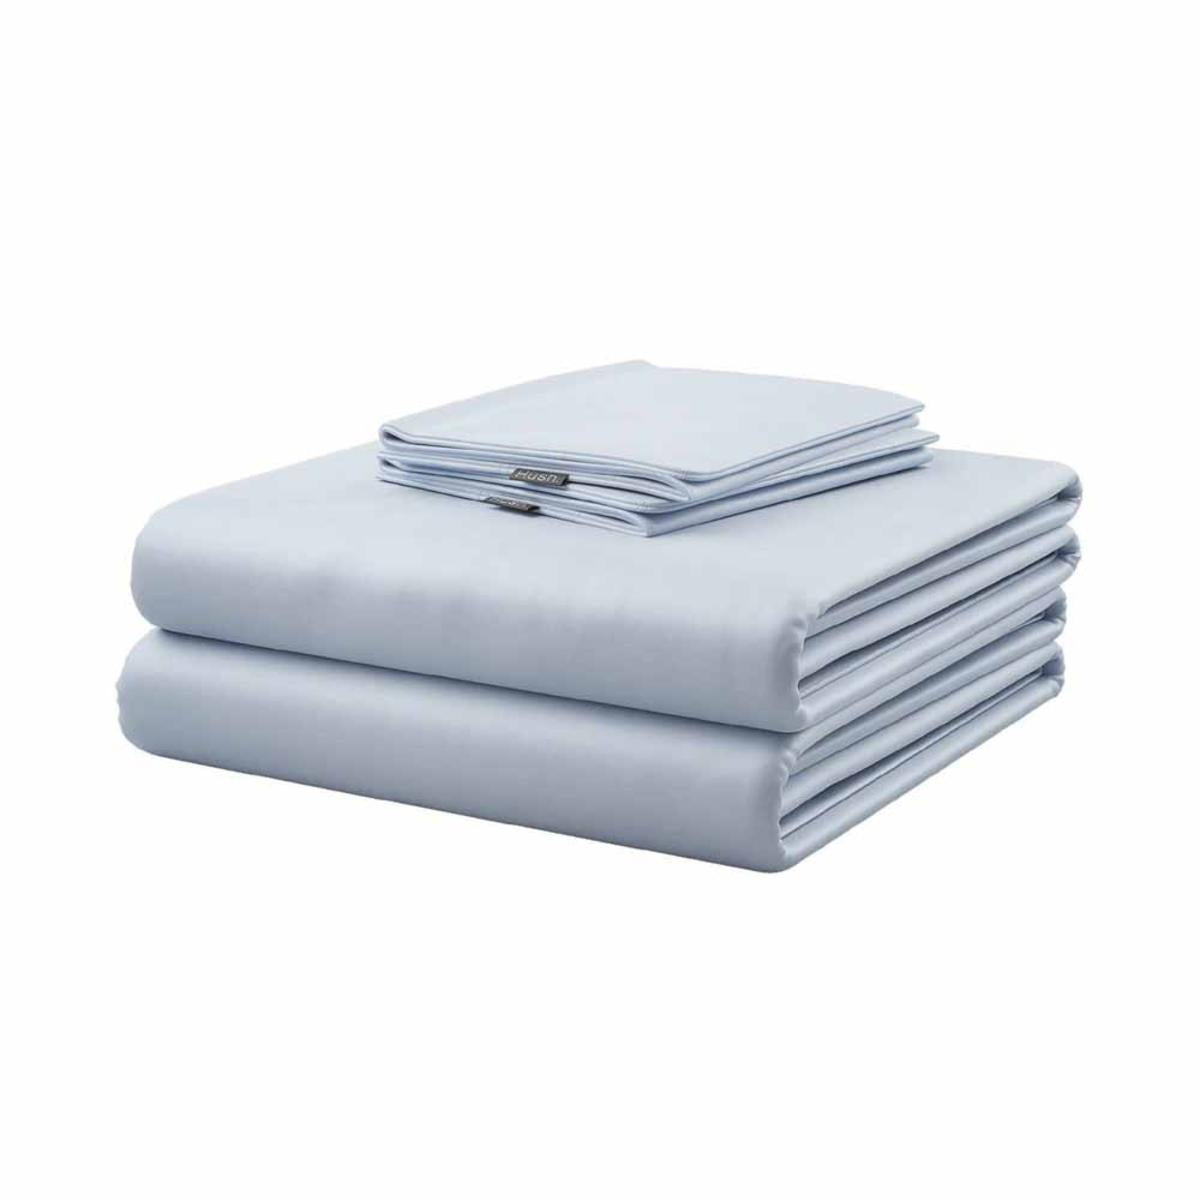 Hush Iced Cooling Sheet and Pillowcase Set - Queen